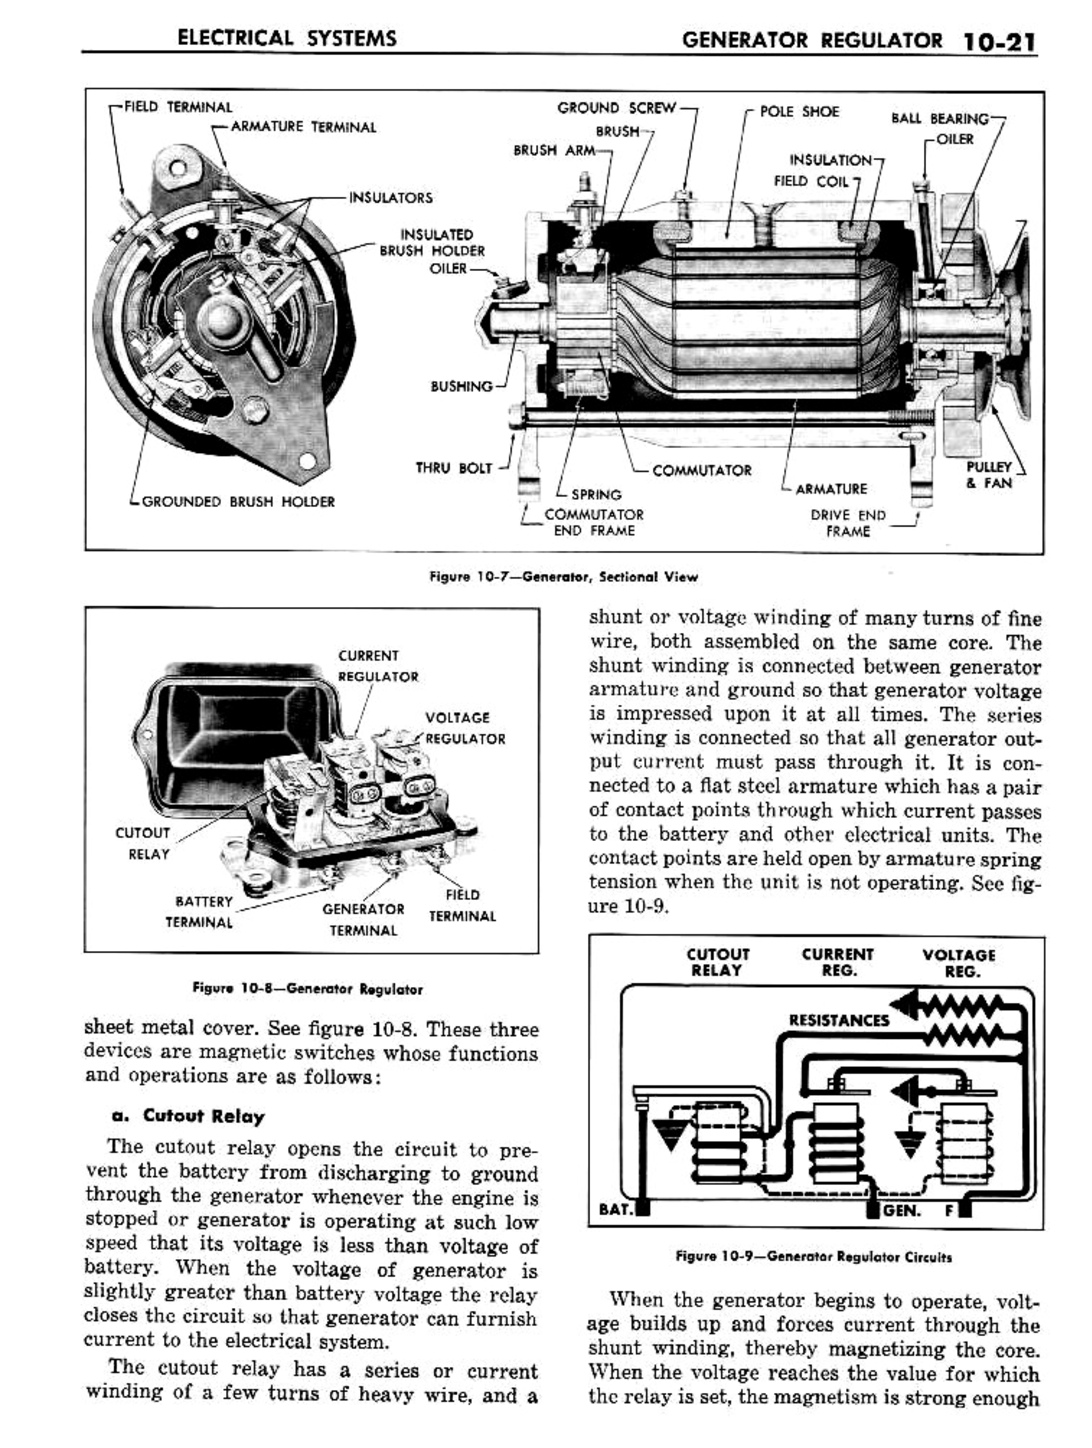 n_11 1957 Buick Shop Manual - Electrical Systems-021-021.jpg